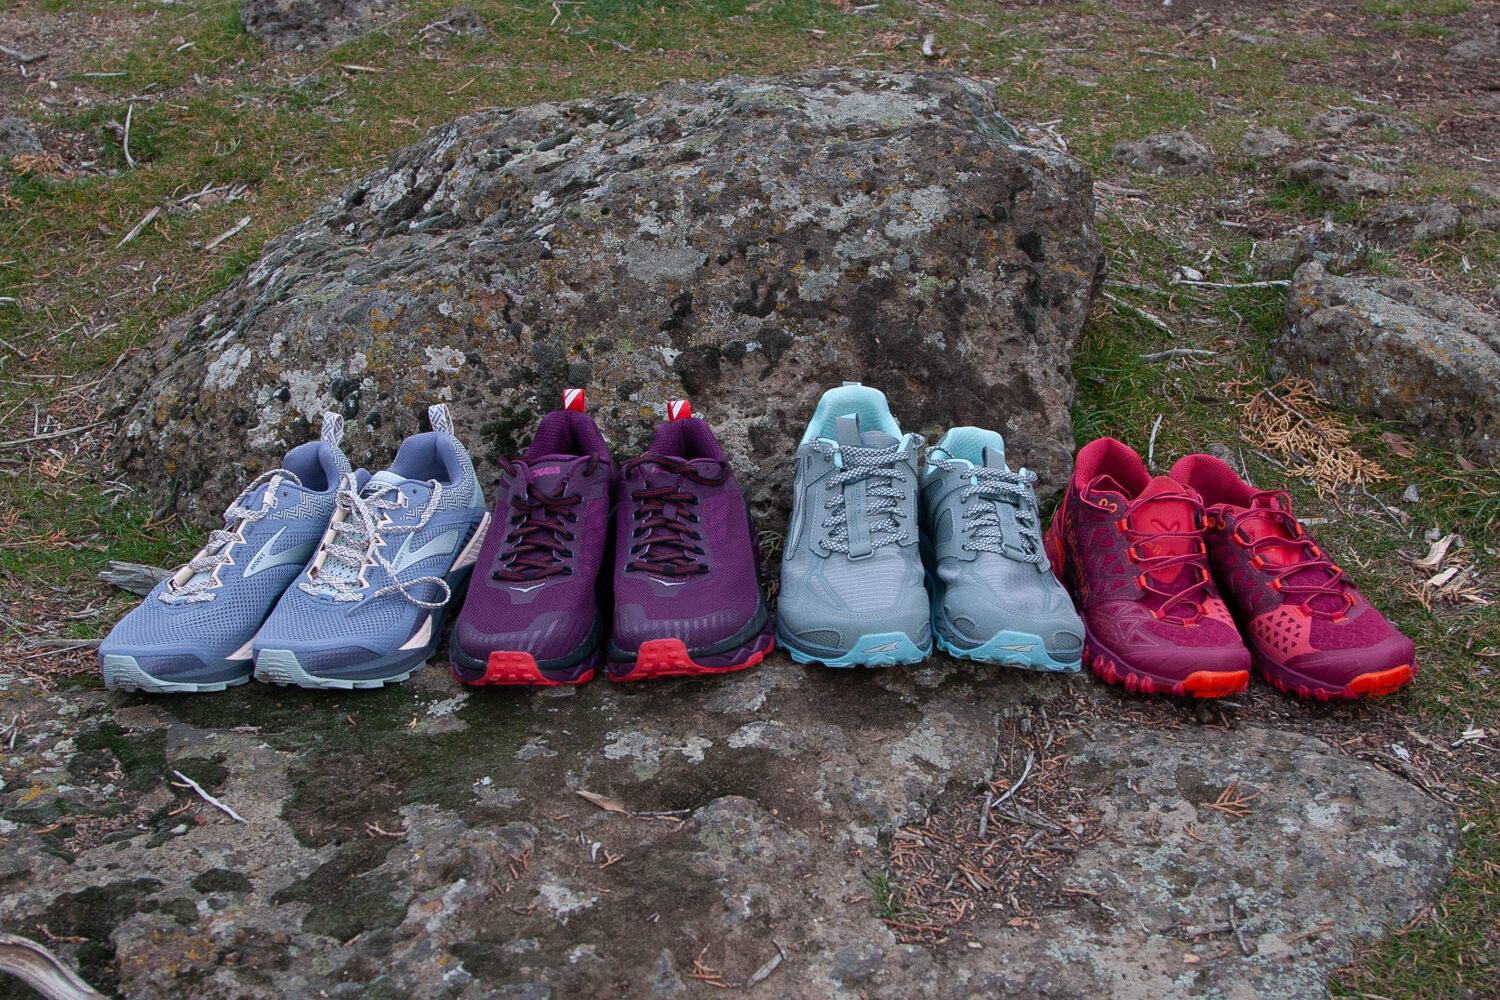 Four pairs of trail running shoes side-by-side for comparison.